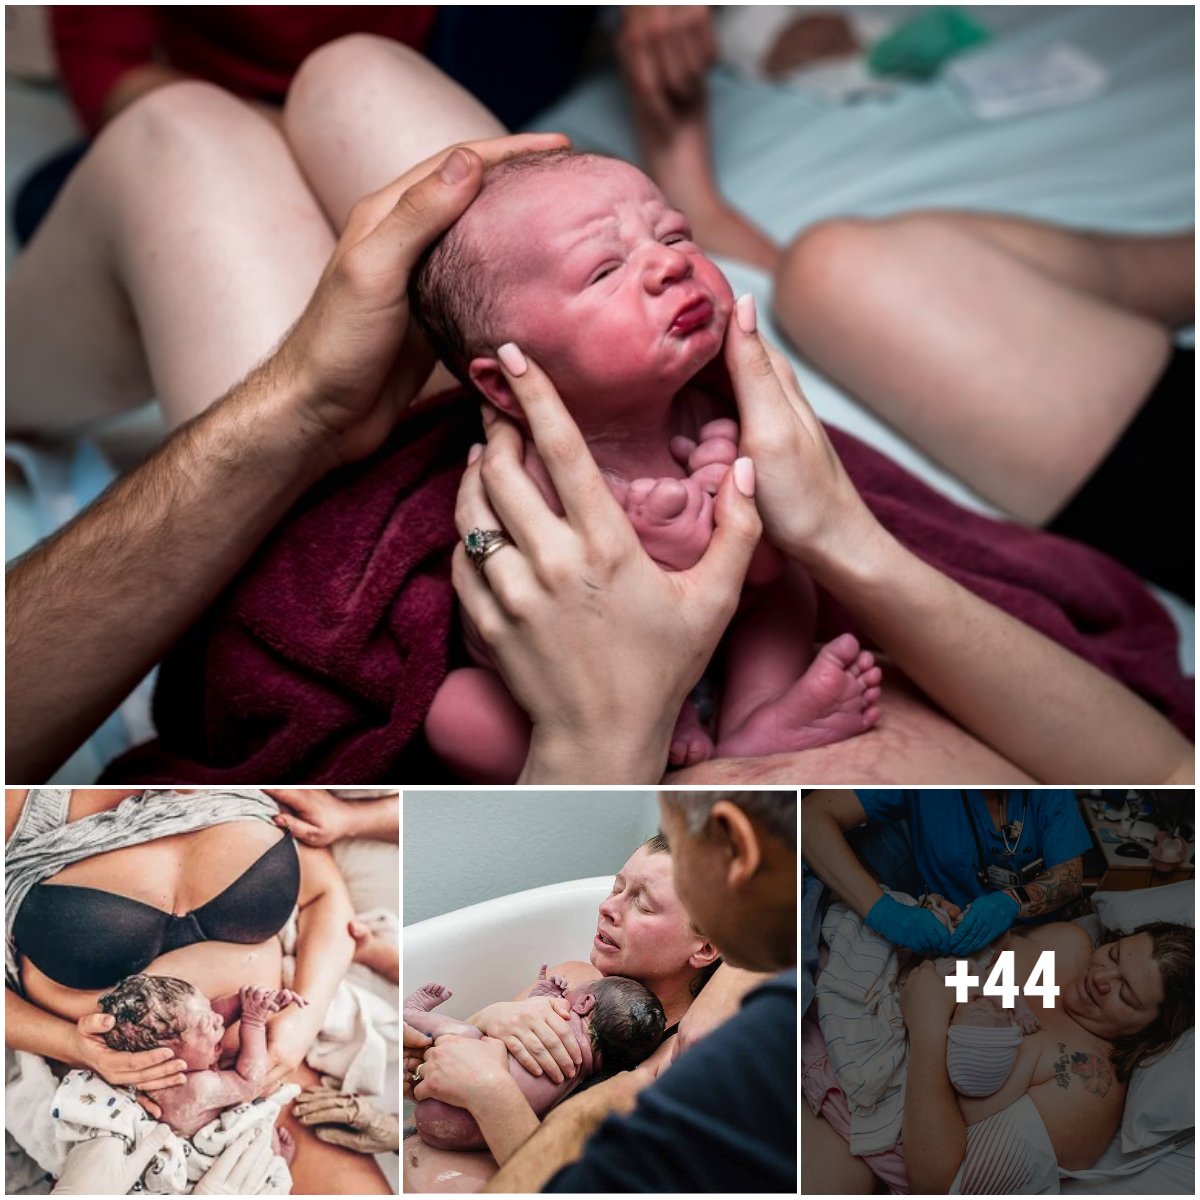 Wonderful scenes of overcoming the most painful difficulties to welcome adorable children into life. Tears of happiness and joy of a mother when giving birth.